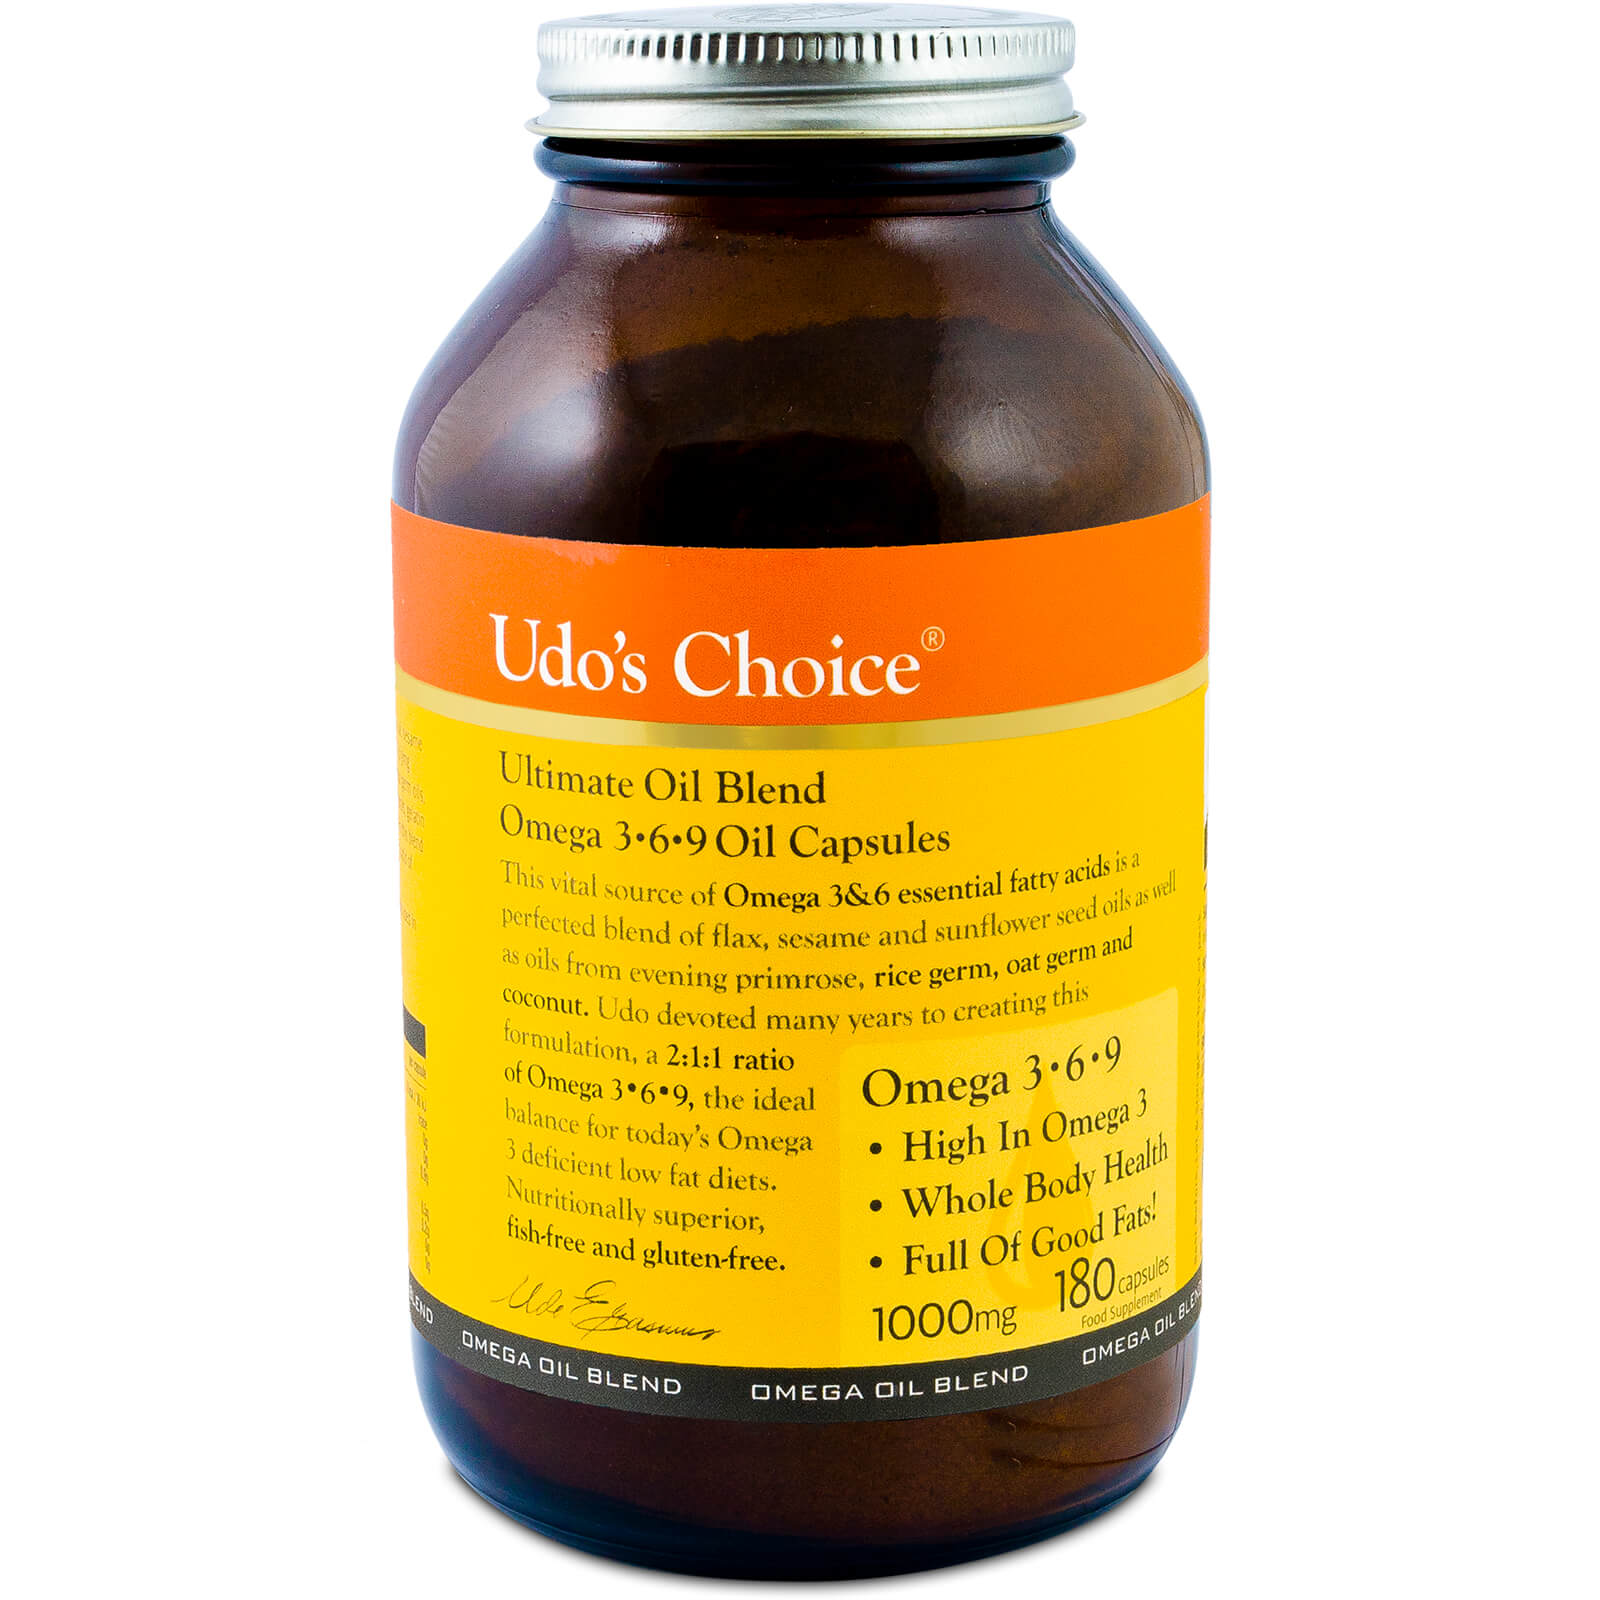 Photos - Vitamins & Minerals Udo's Choice Ultimate Oil Blend  - 180 Caps FMD042(1000mg)